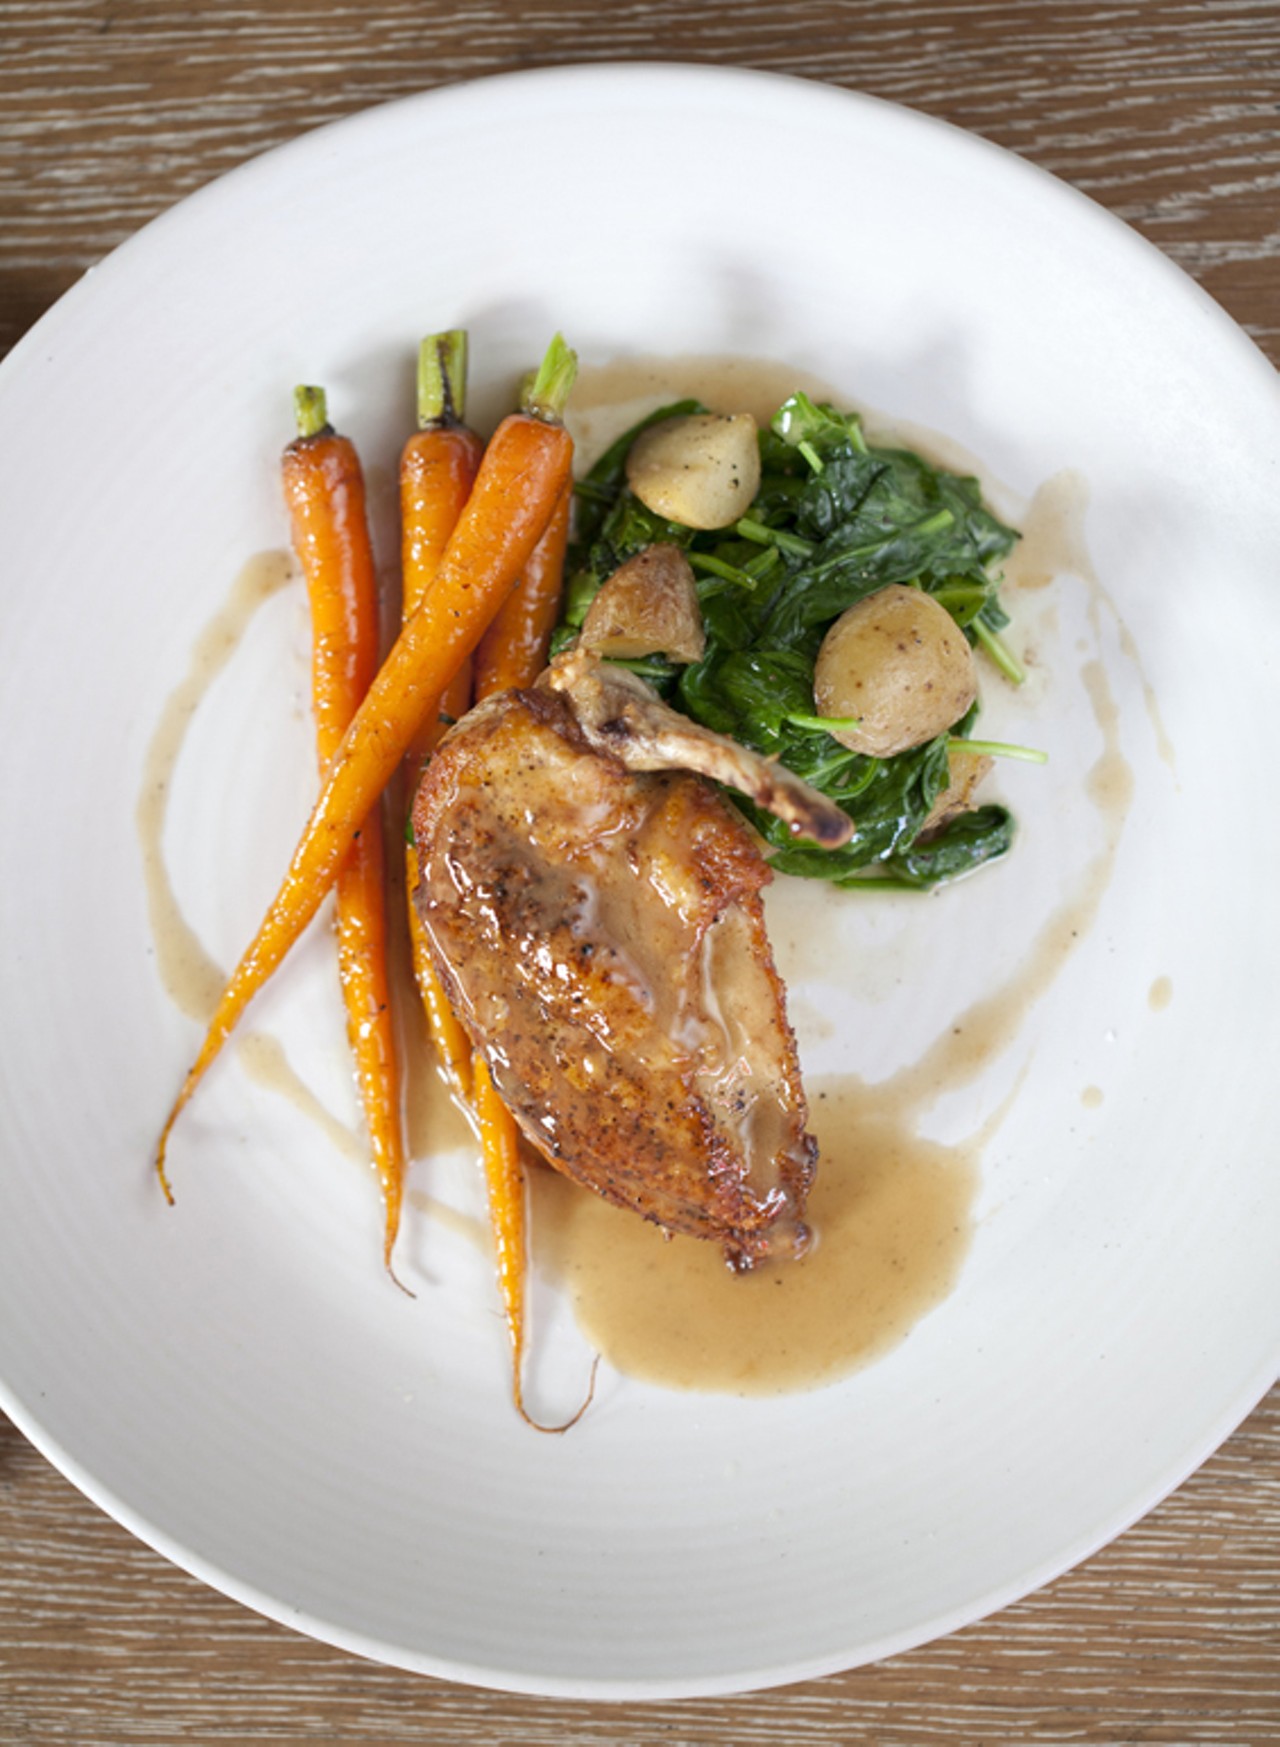 Harr Farms Chicken. Pan-roasted chicken breast, sauteed spinach, fingerling potato, sculpted carrots, bacon butter.